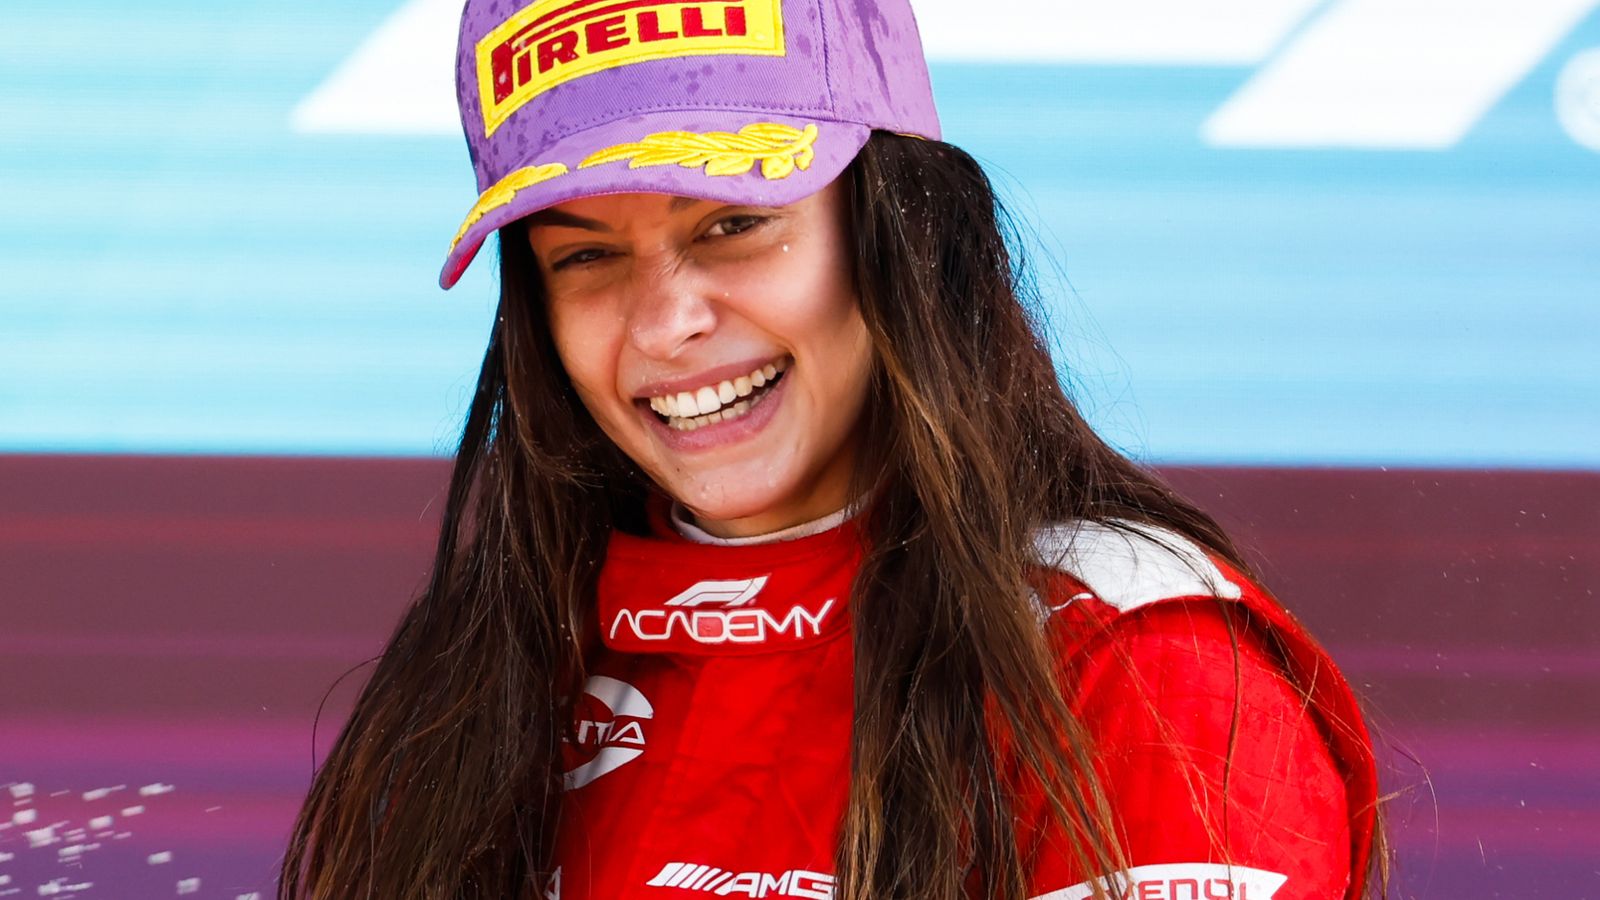 F1 Academy champion Garcia lands fully-funded junior series seat